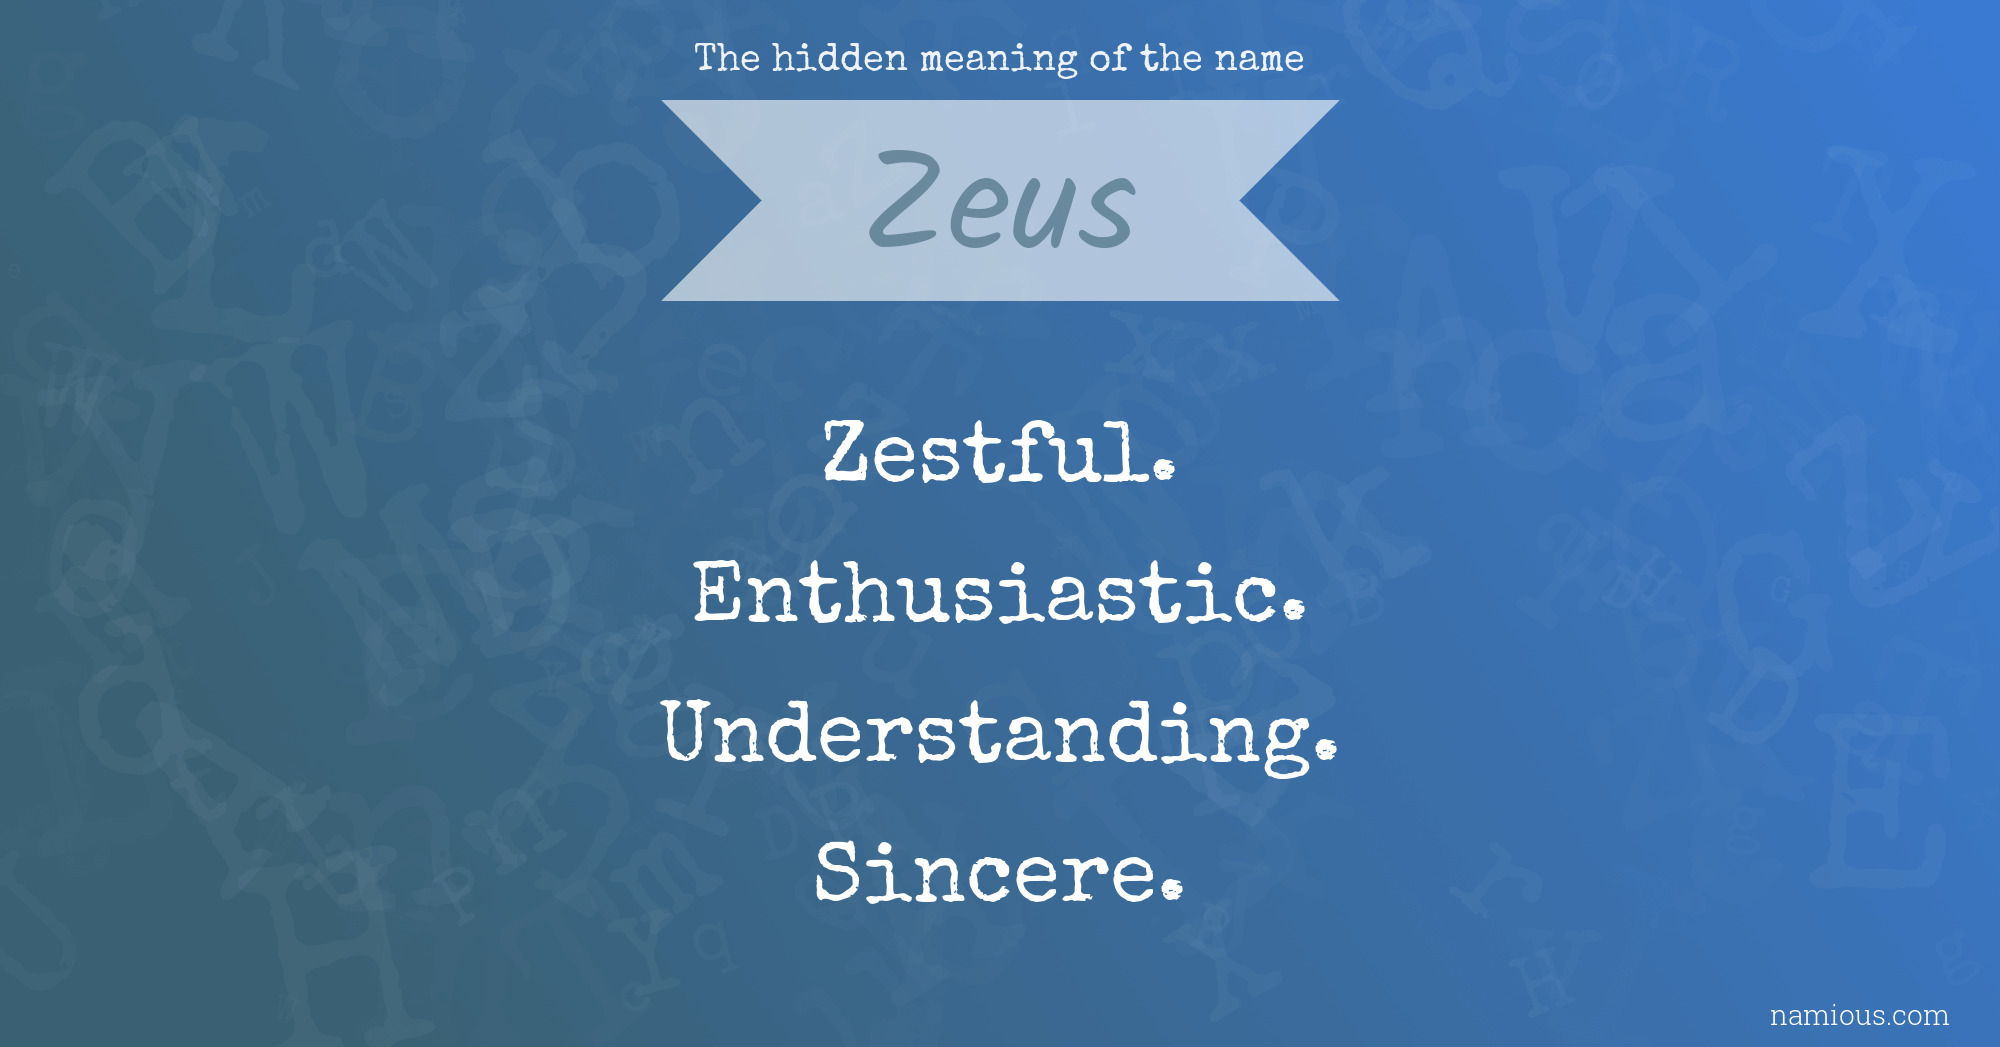 The hidden meaning of the name Zeus